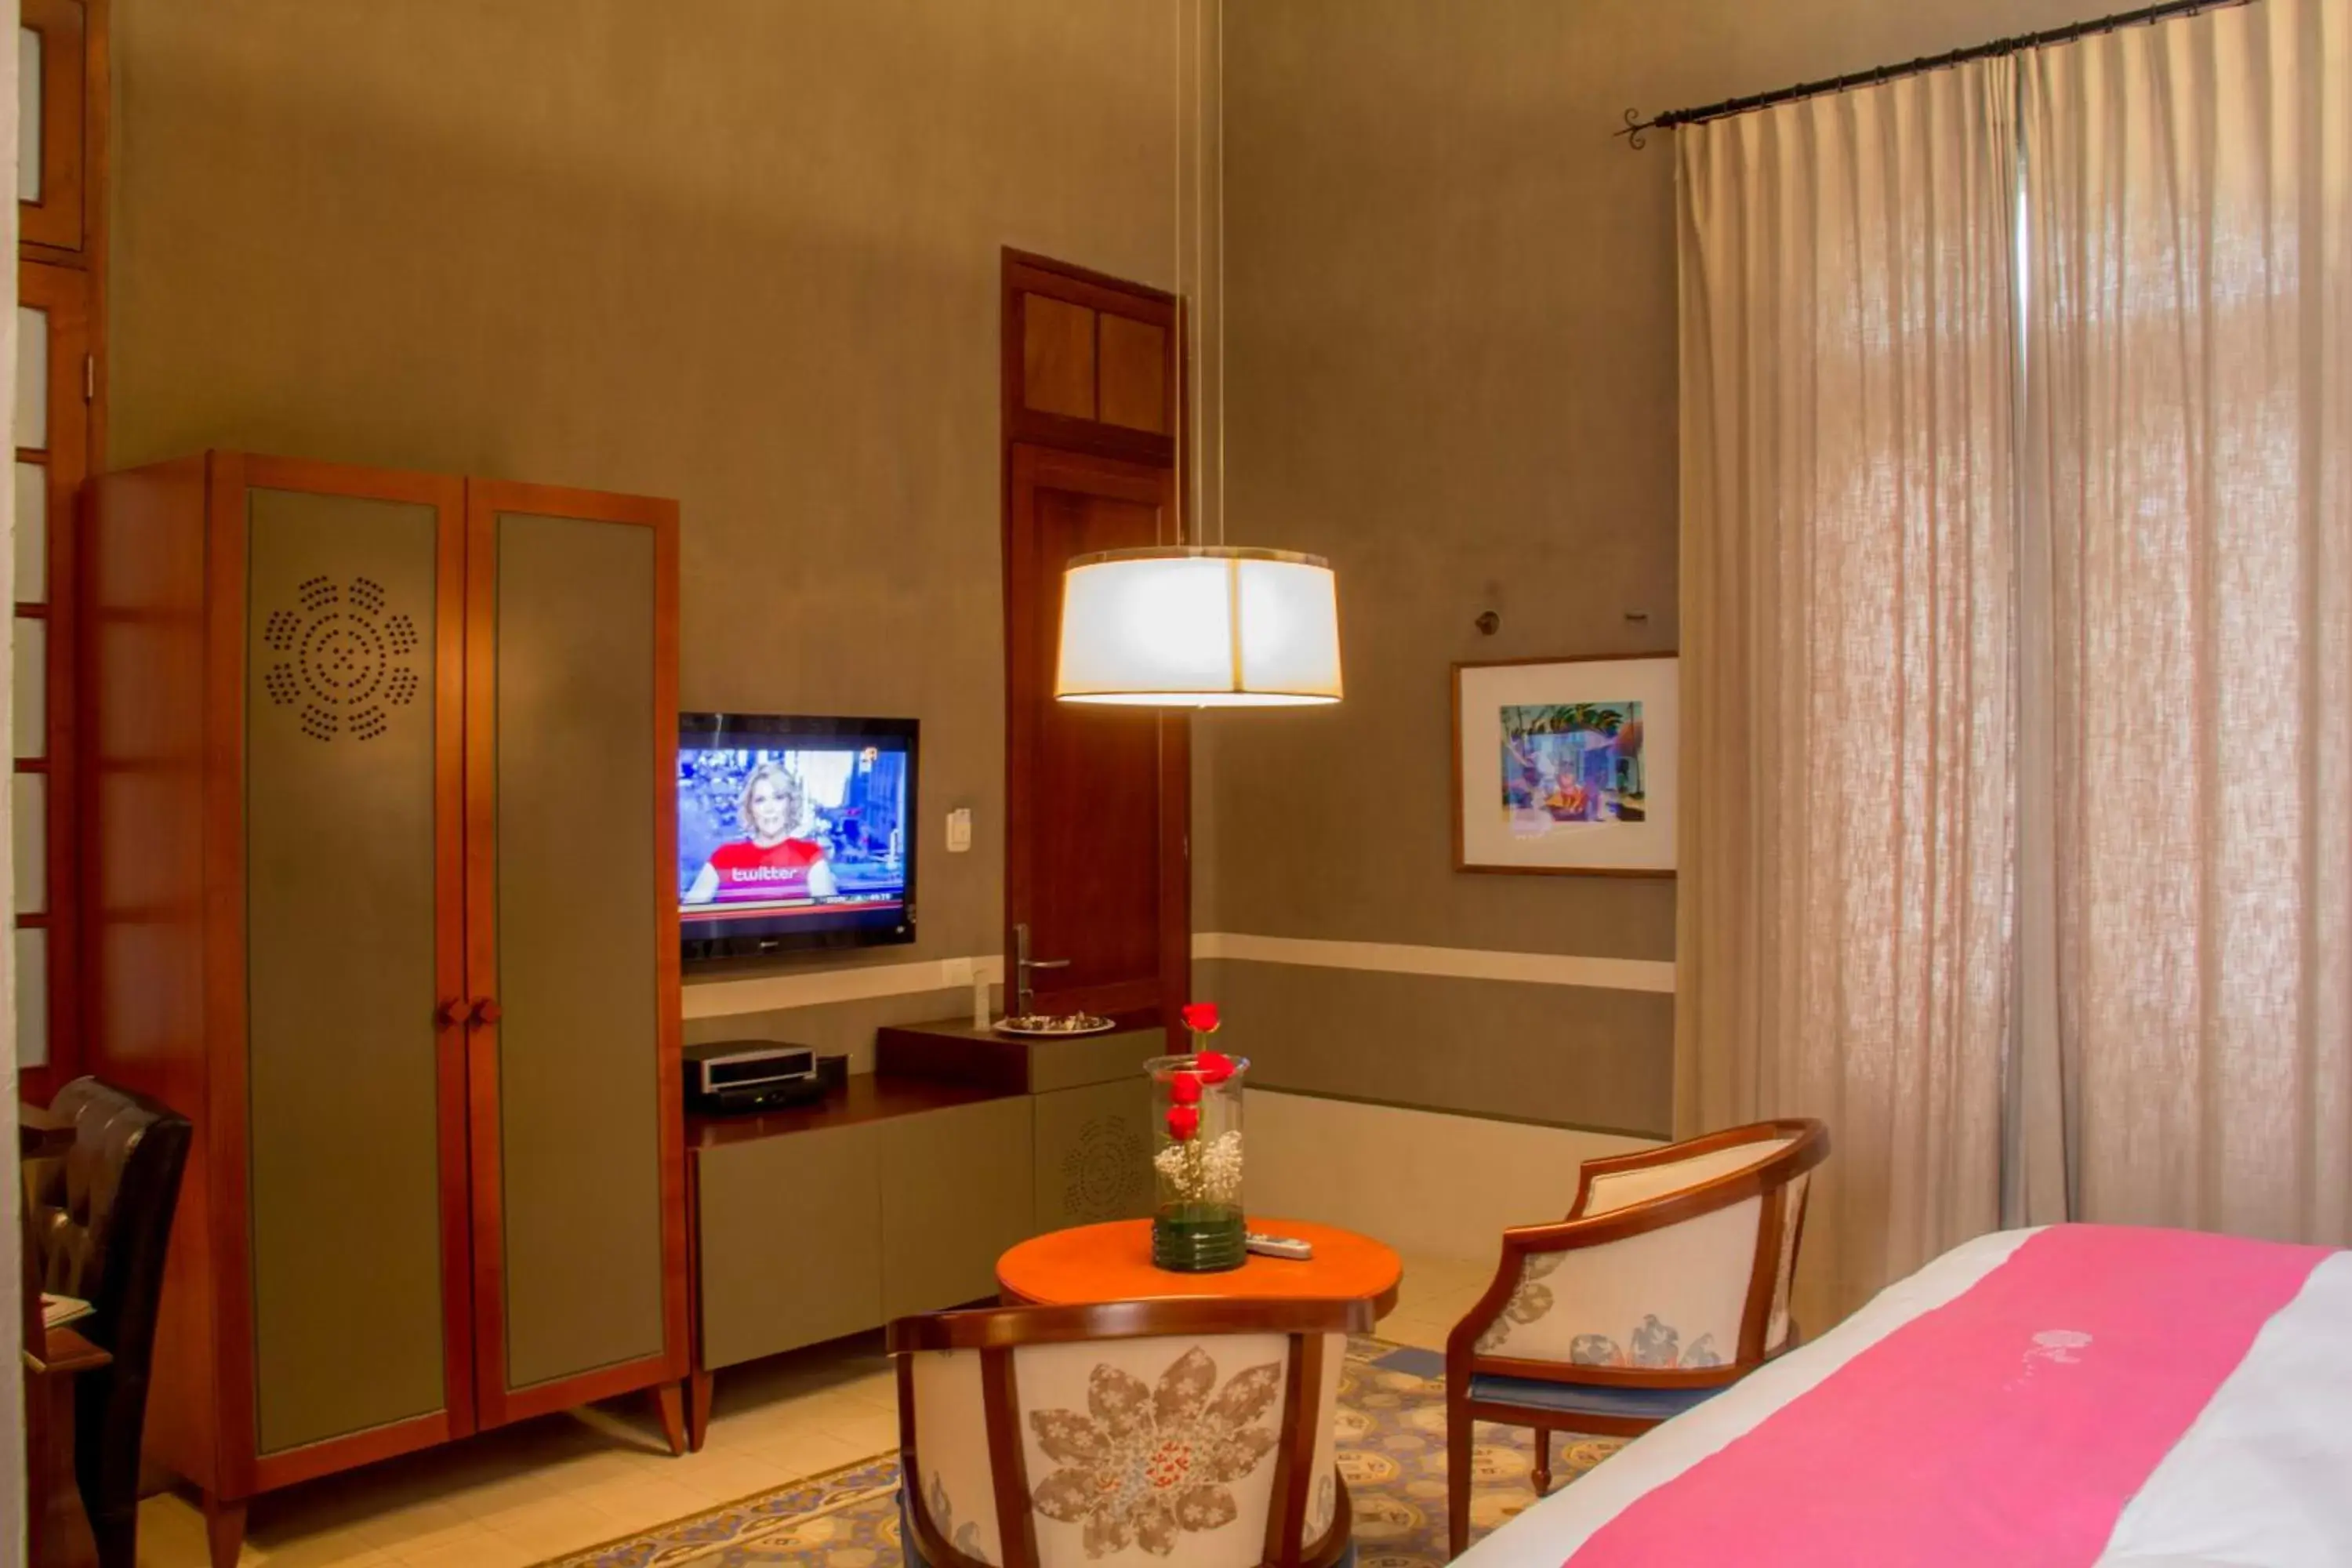 Decorative detail, TV/Entertainment Center in Rosas & Xocolate Boutique Hotel and Spa Merida, a Member of Design Hotels